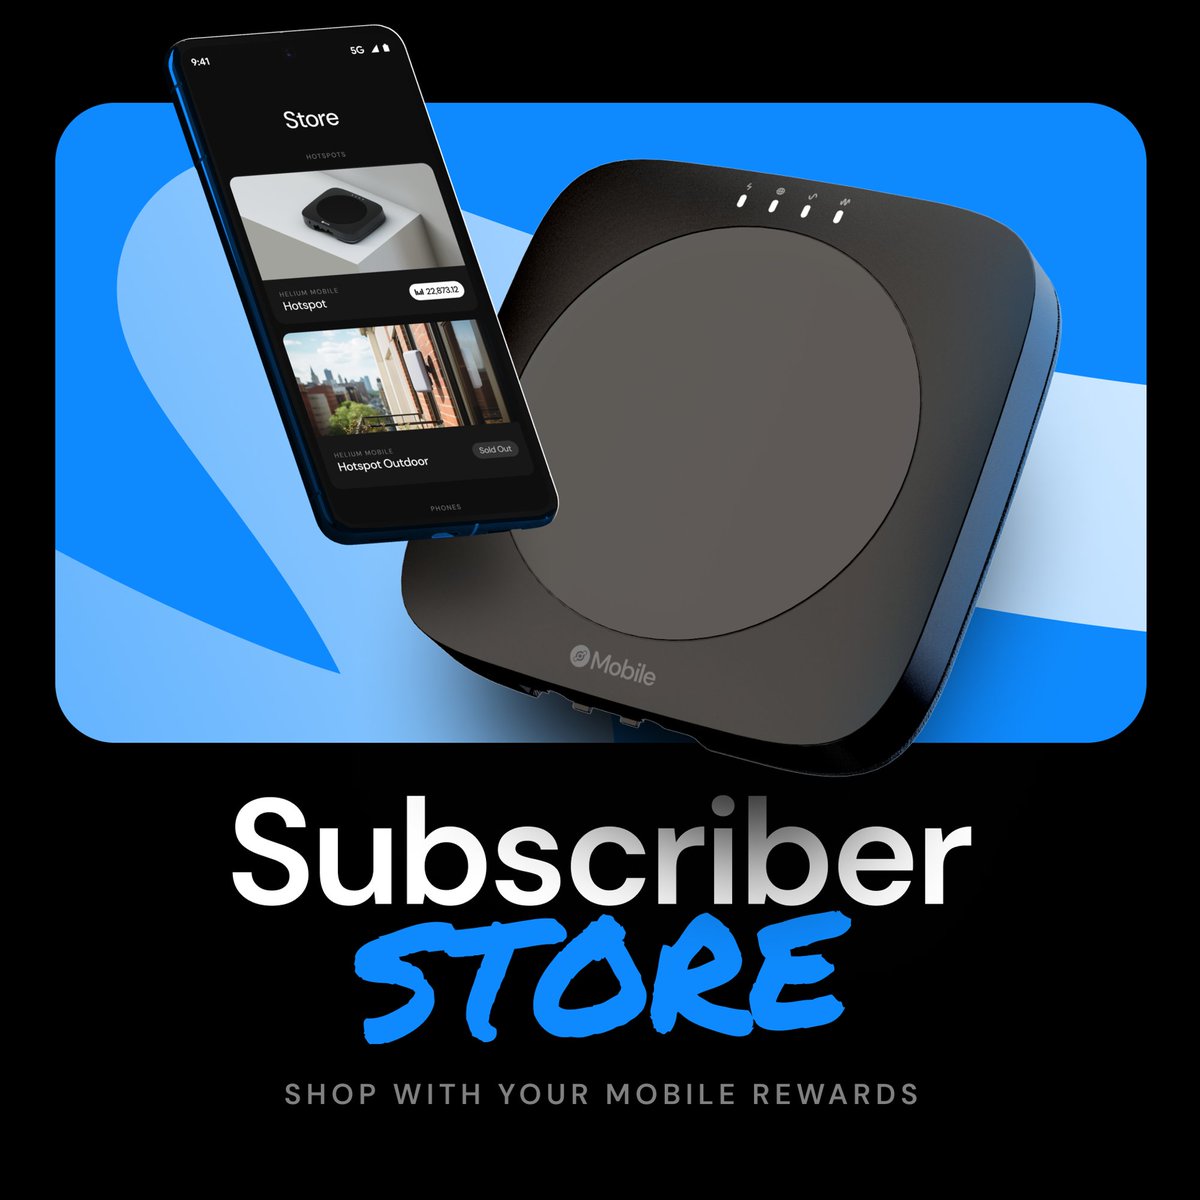 Introducing the Helium Mobile subscriber store! 🔥 Now, you can use your MOBILE rewards to snag Pixels and Hotspots right in the app. And that's just the start - more exclusive items are coming in the future. This week we’ll be offering free shipping on orders from the